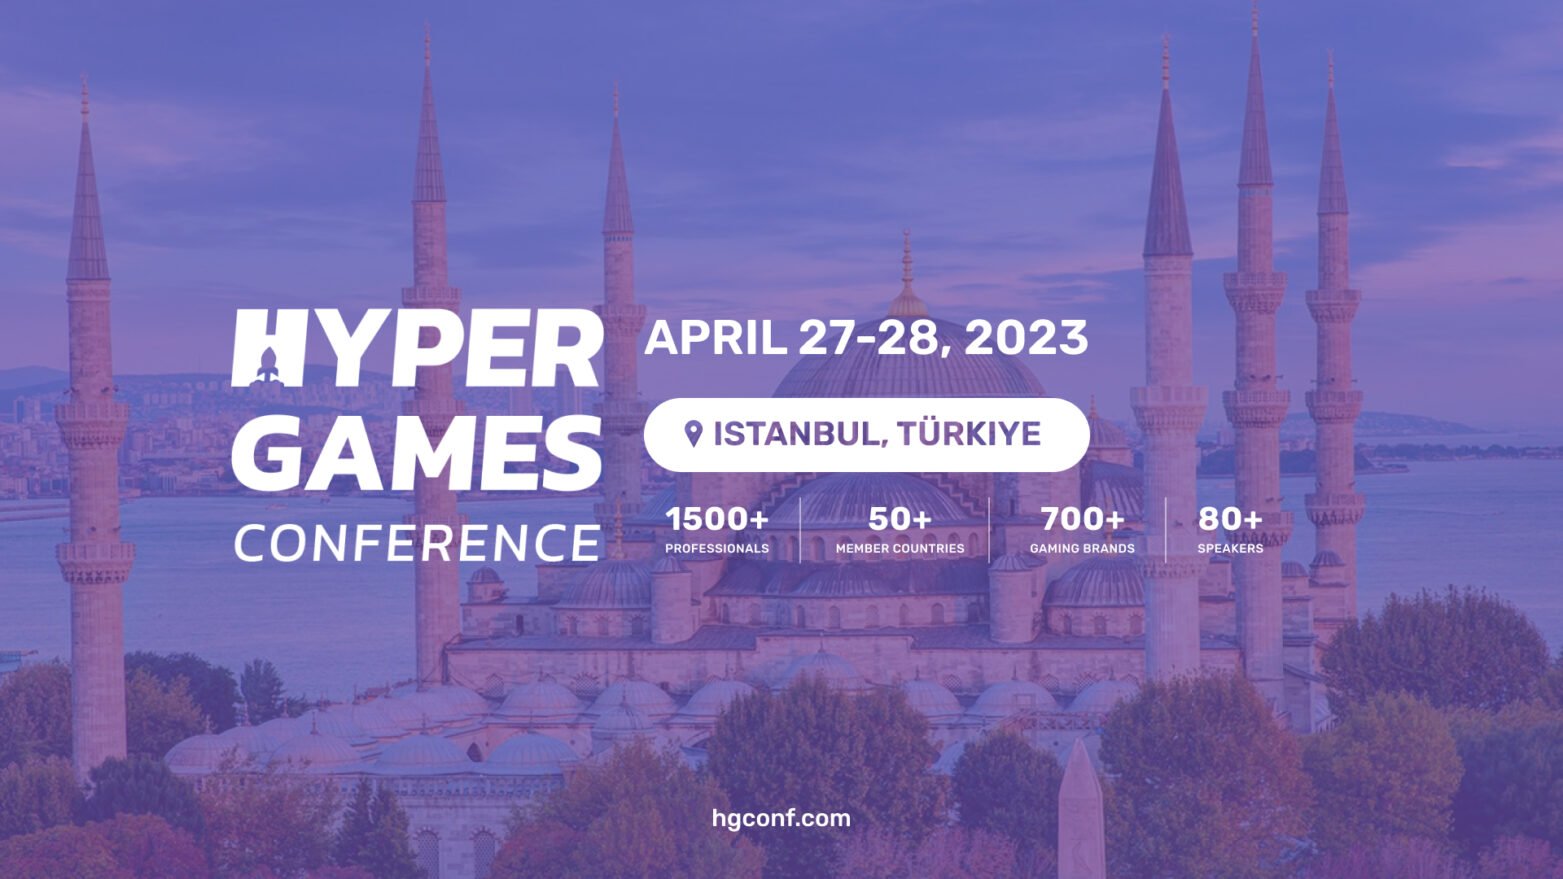 HGC will be held in Istanbul on April 27-28.